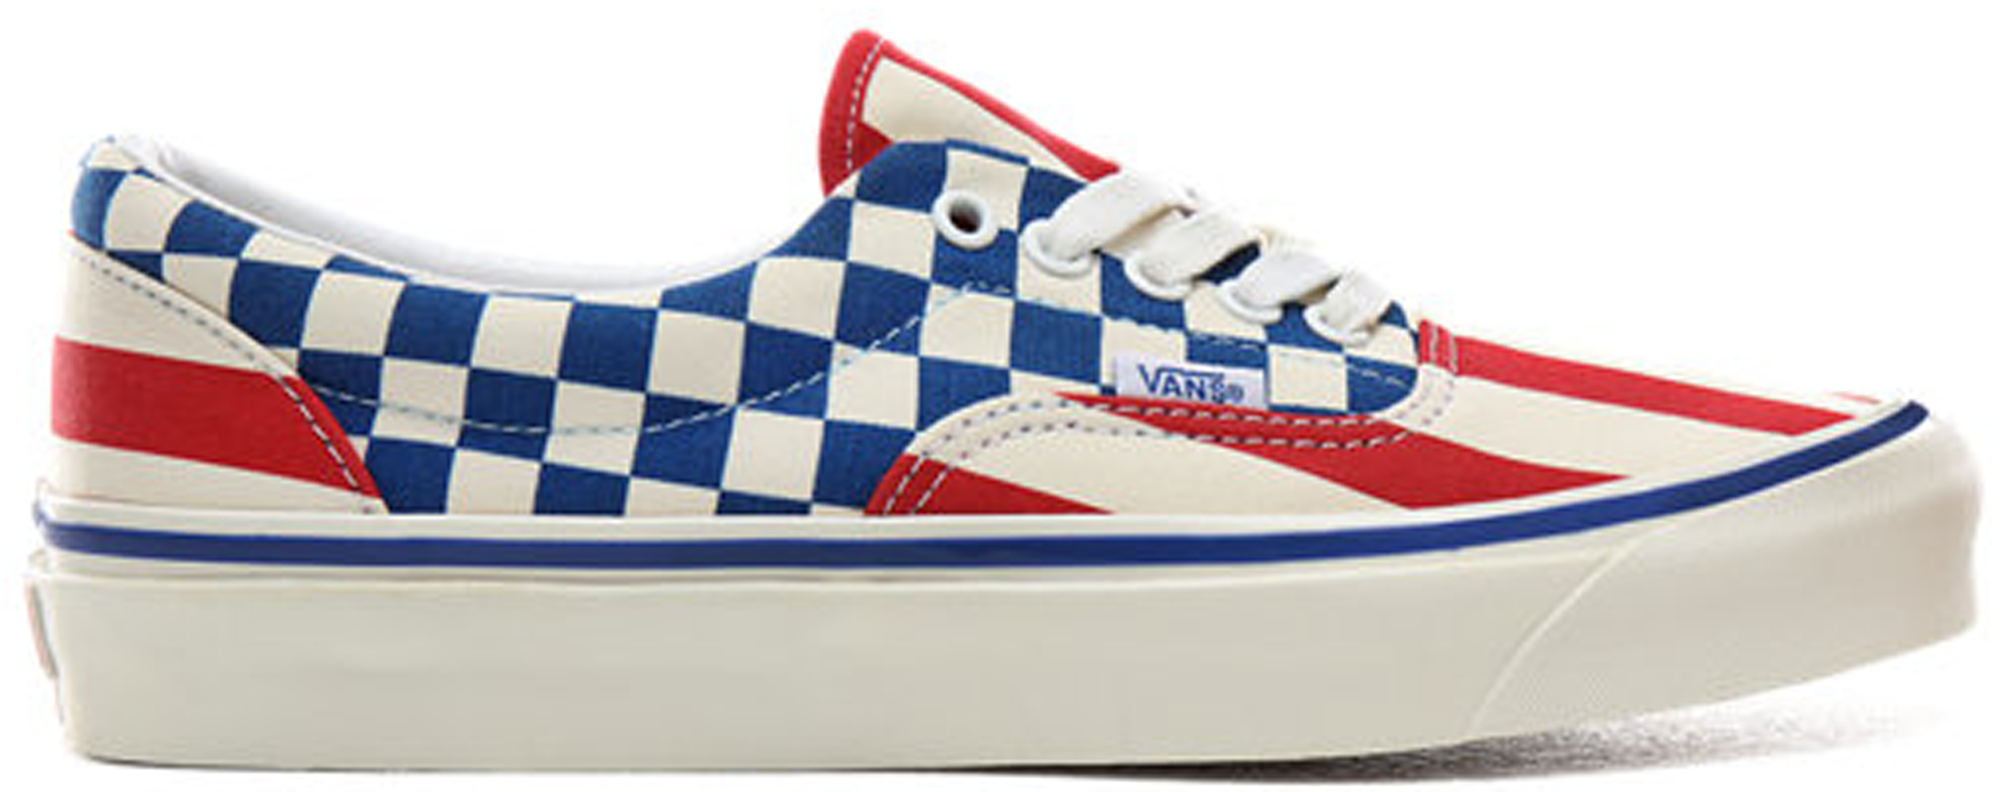 red and blue checker vans